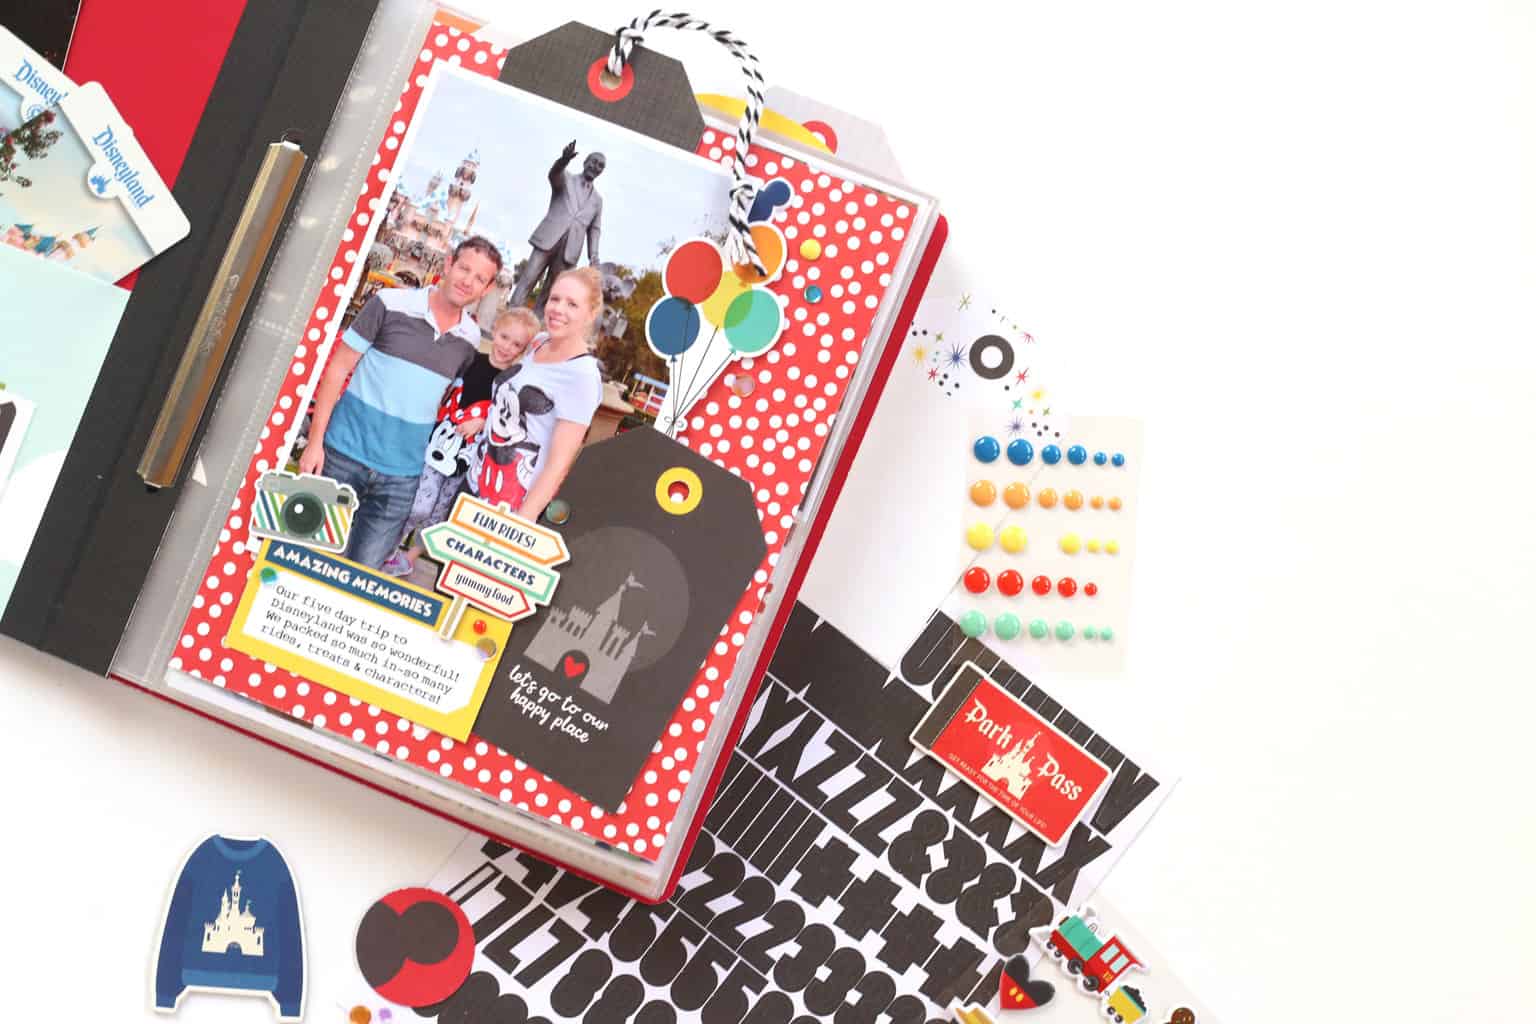 SCRAPBOOKING 101 - Scrapbook Ideas, Supplies and More, Disney Pages